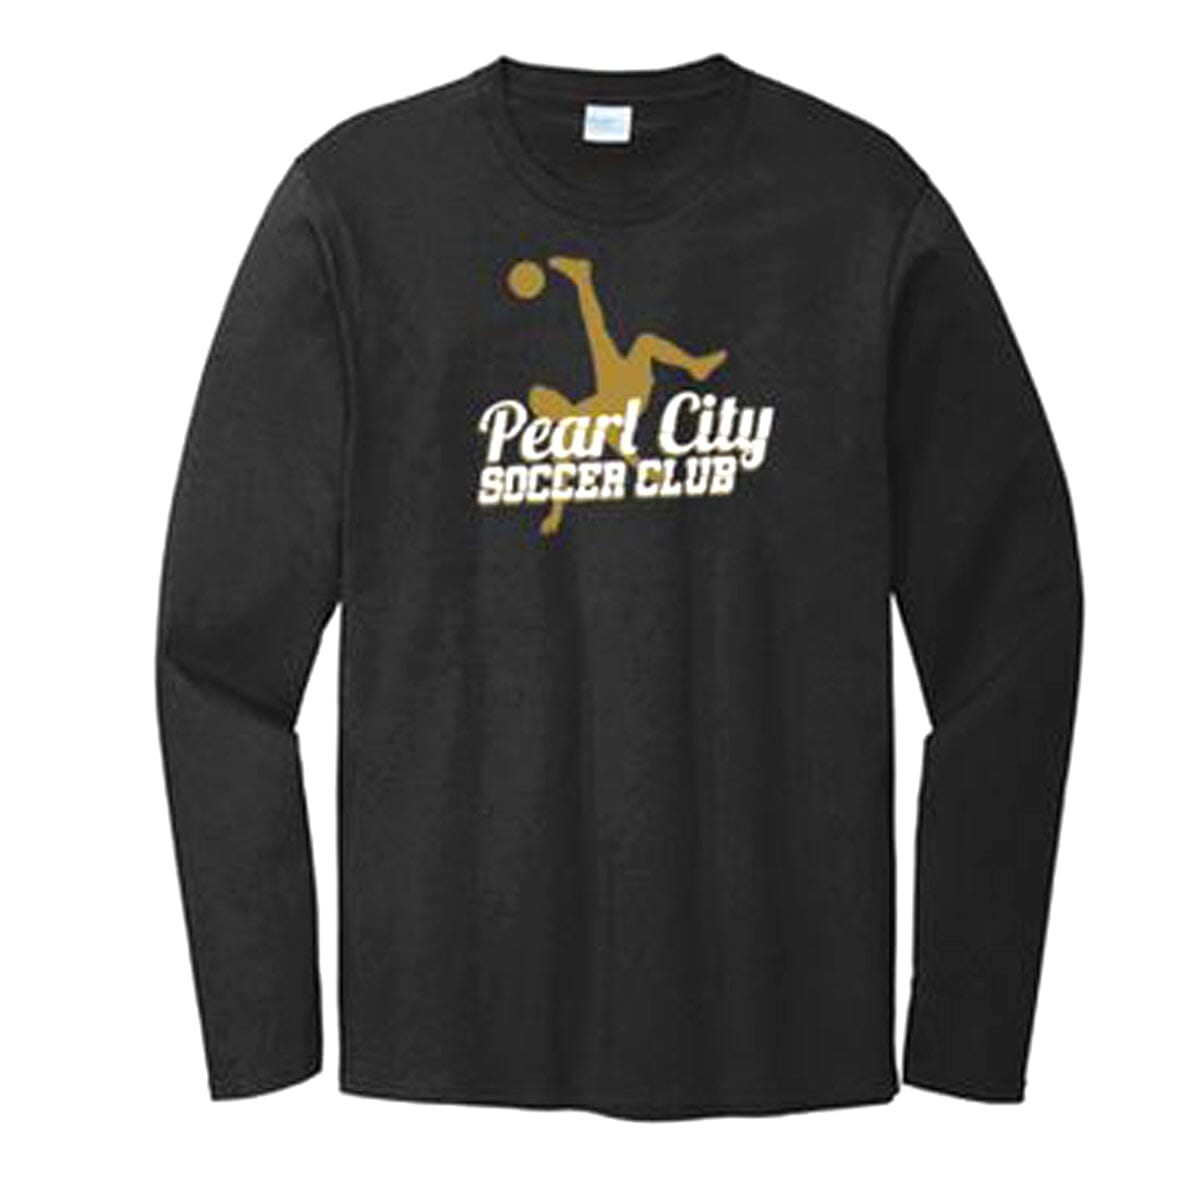 Pearl City Soccer Club Men's Perfect Weight Long Sleeve Tee Long Sleeve Goal Kick Soccer Adult X-Small Jet Black 